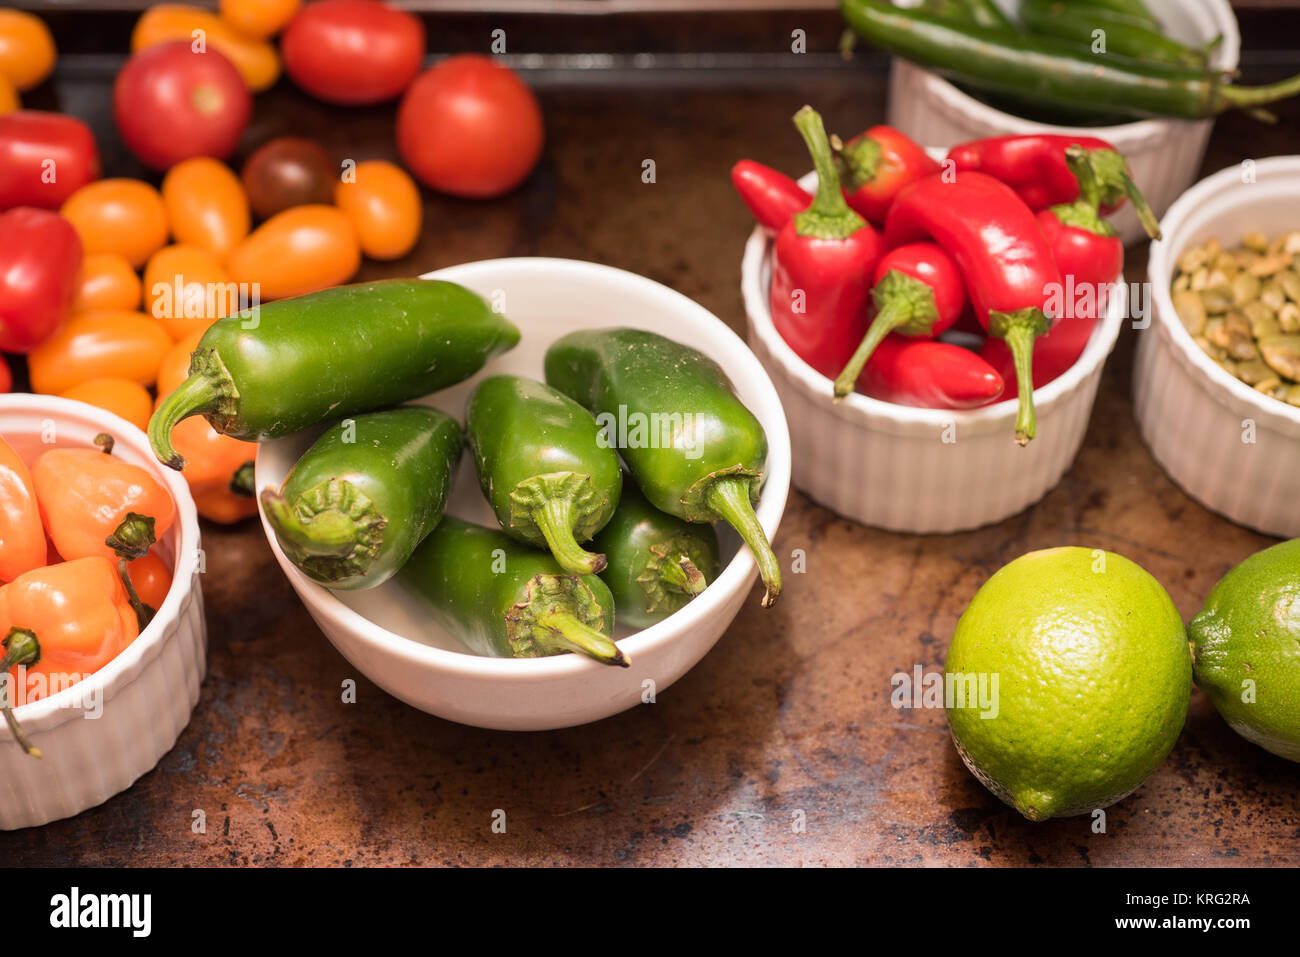 Selection of chilis, tomatoes and limes in bowls Stock Photo